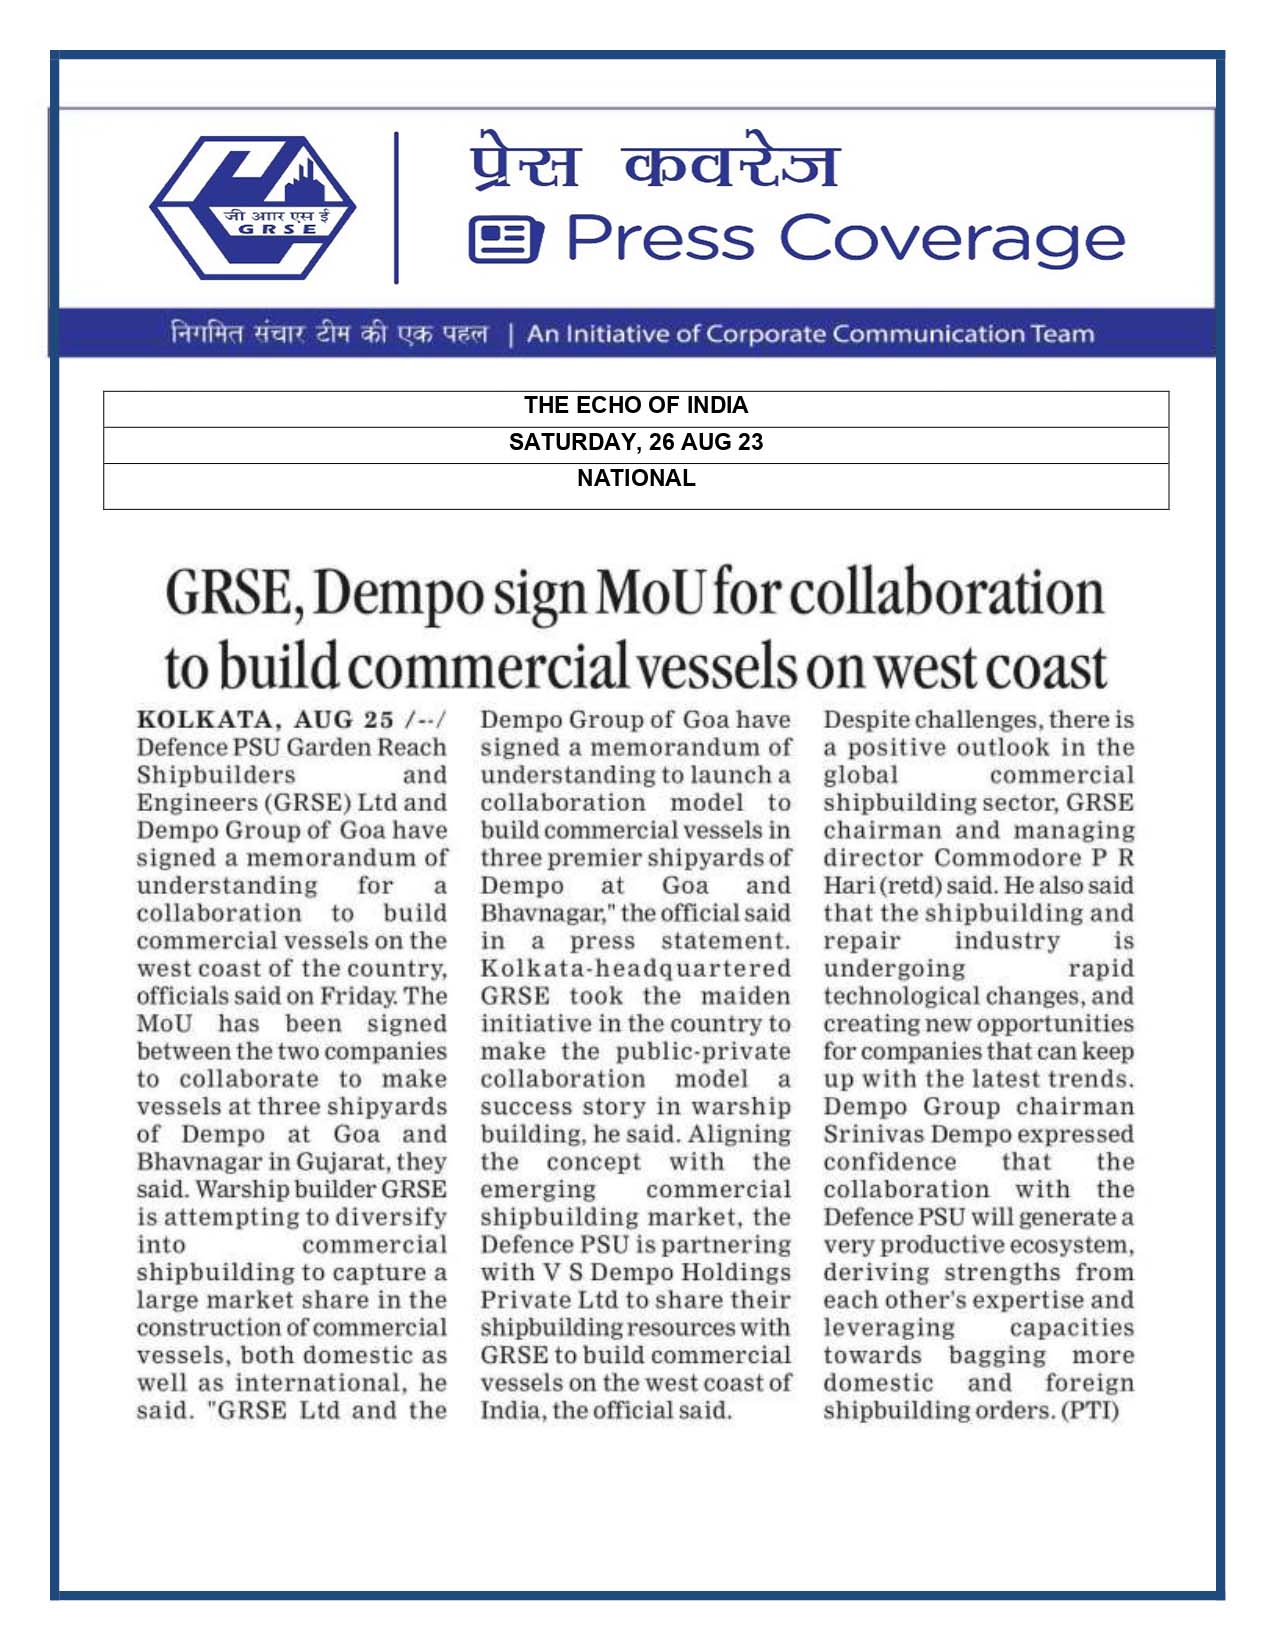 Press Coverage : The Echo of India, 26 Aug 23 : GRSE, Dempo sign MoU for collaboration to build commercial vessel on west coast